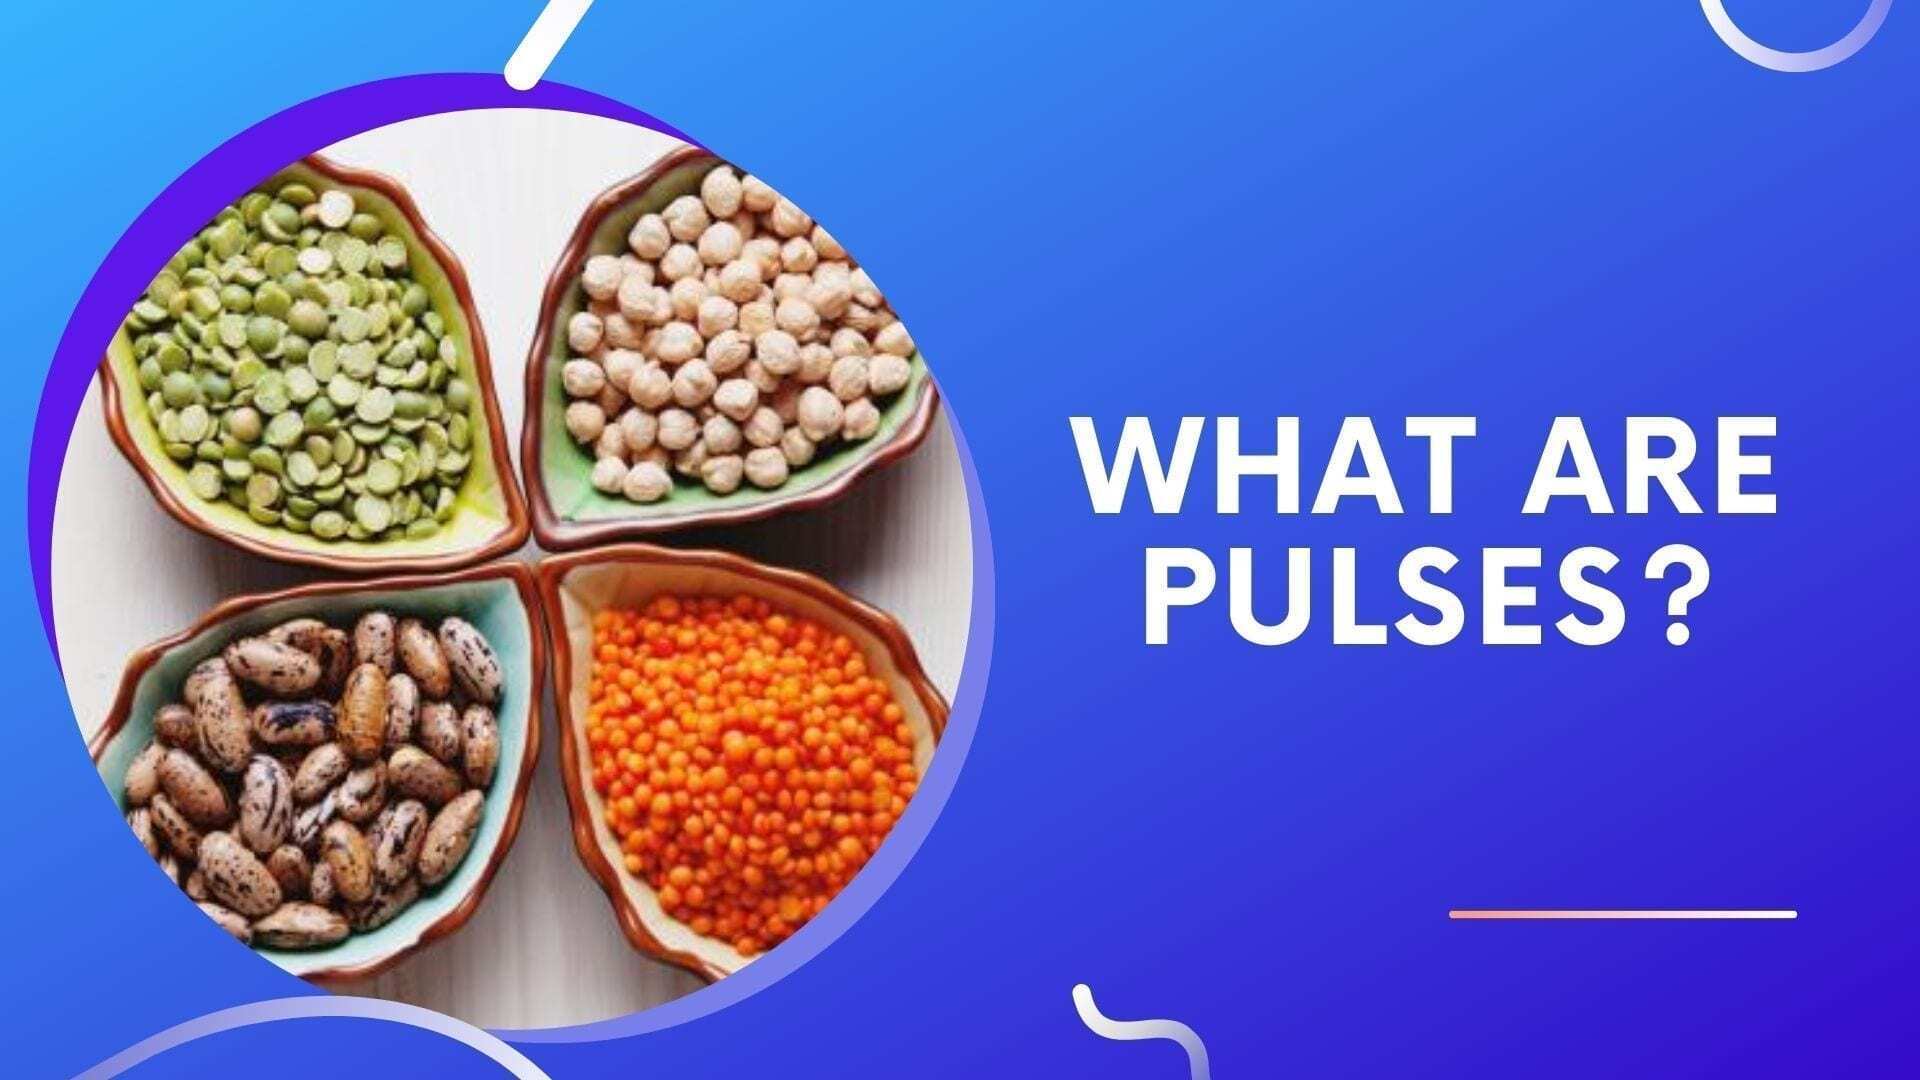 What Are Pulses?